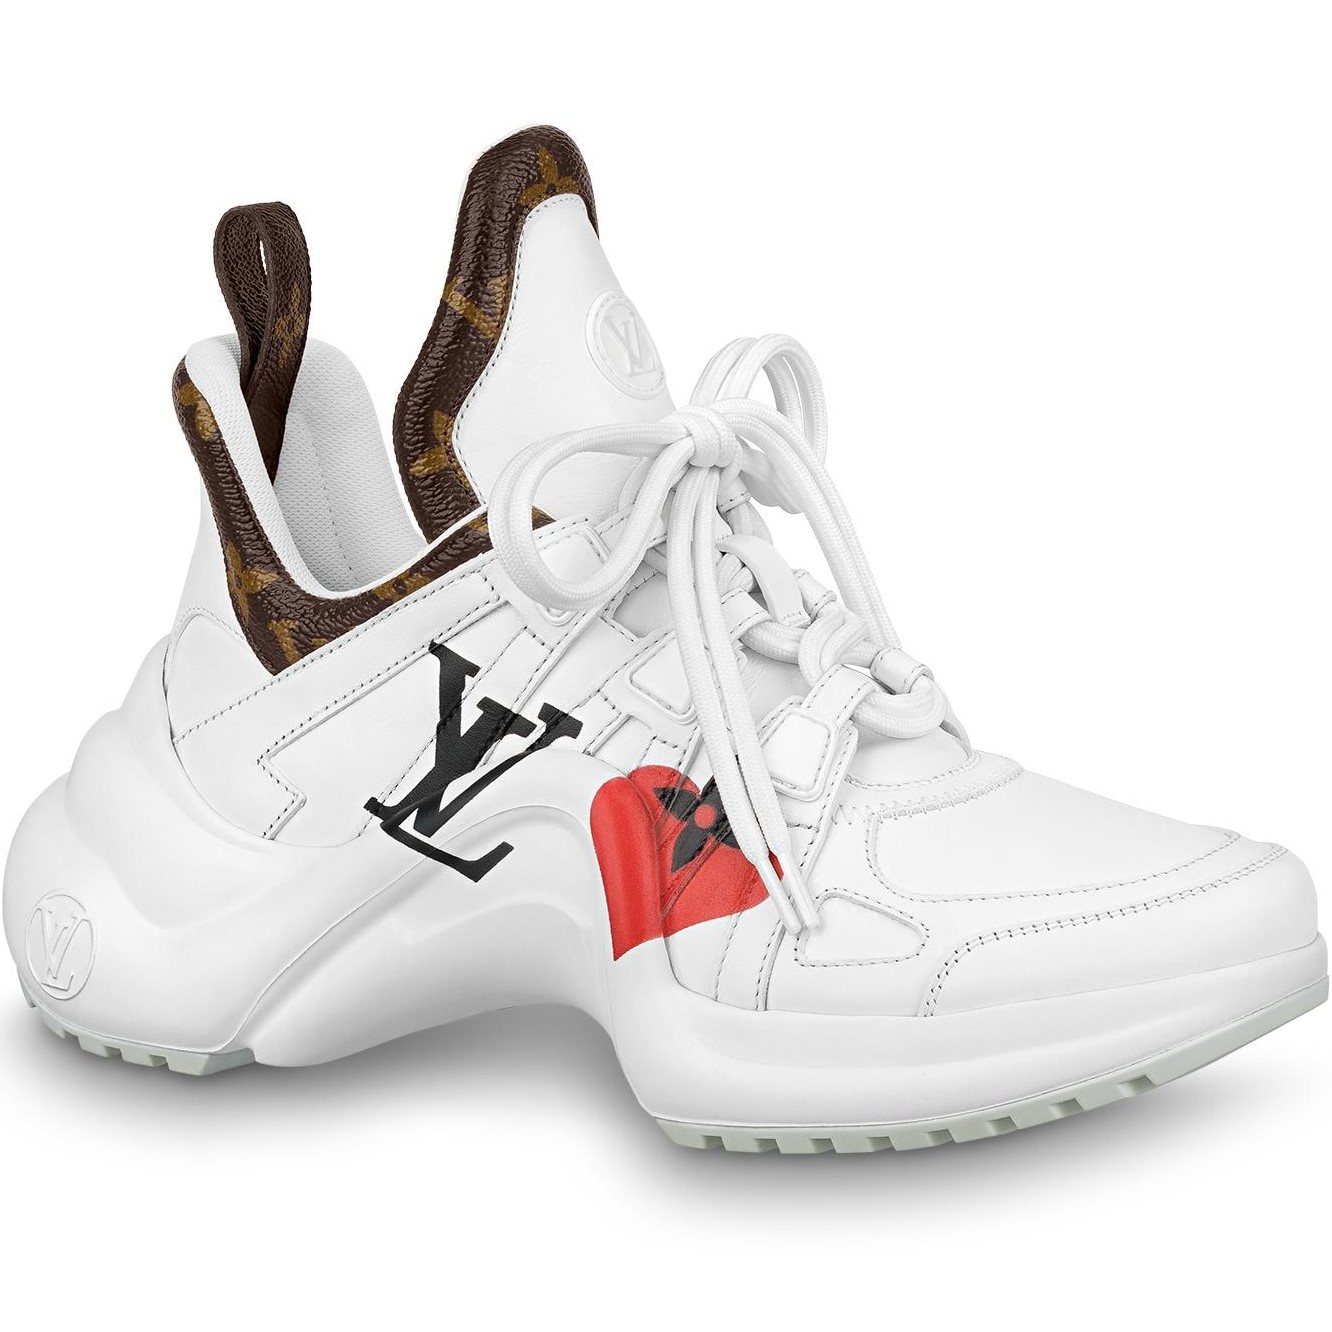 GIÀY LV NỮ LOUIS VUITTON GAME ON LV ARCHLIGHT SNEAKER IN WHITE 1A8MRP 5